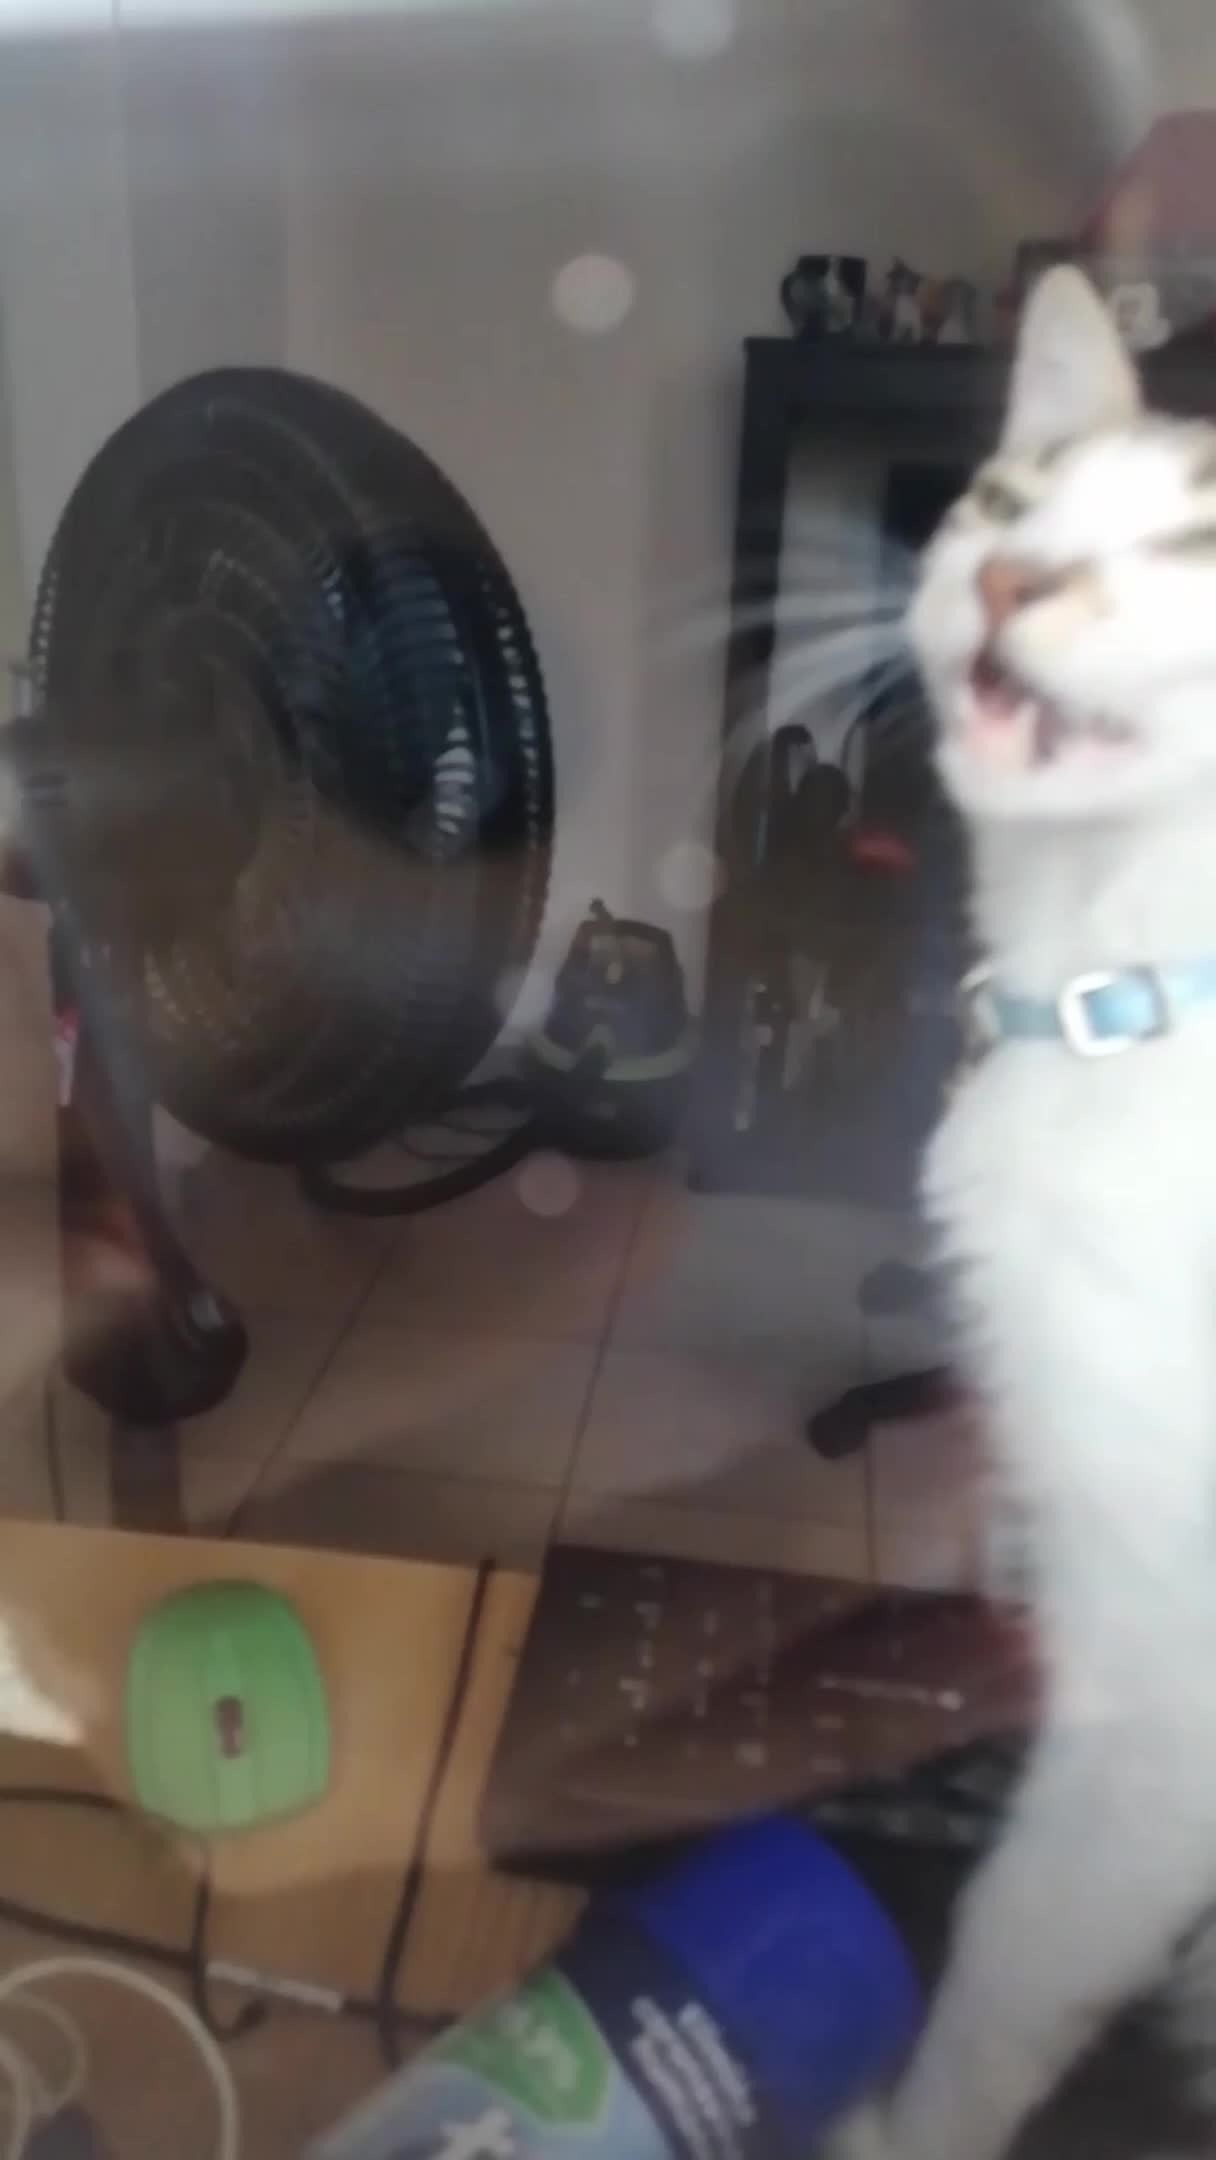 Cat Opens Window and Lets Owner Inside House 